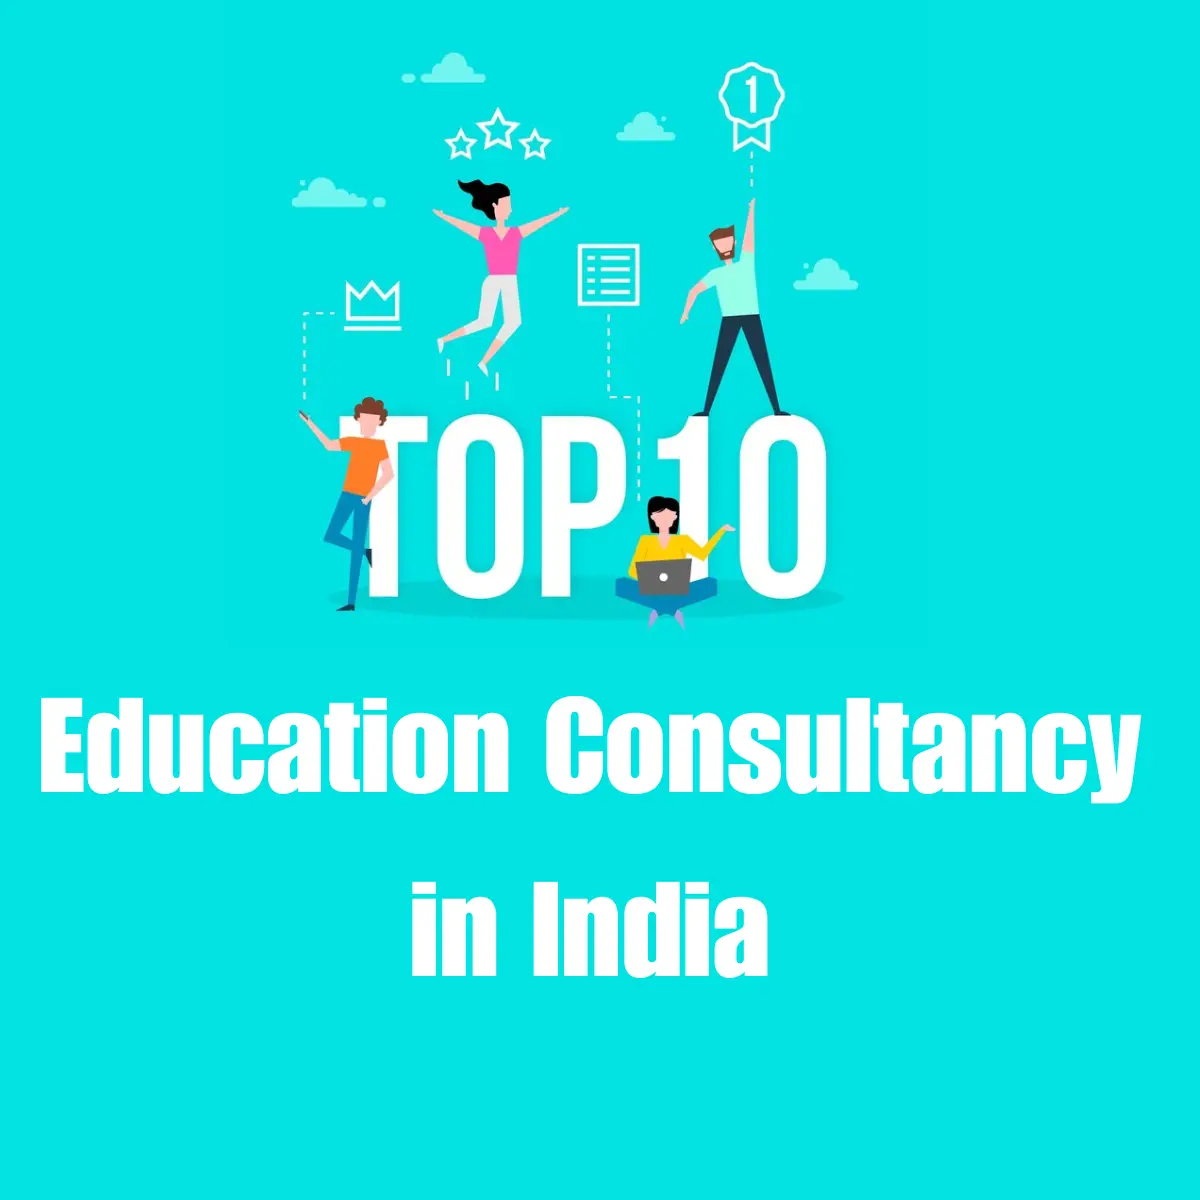 Top 10 Education Consultacy in India